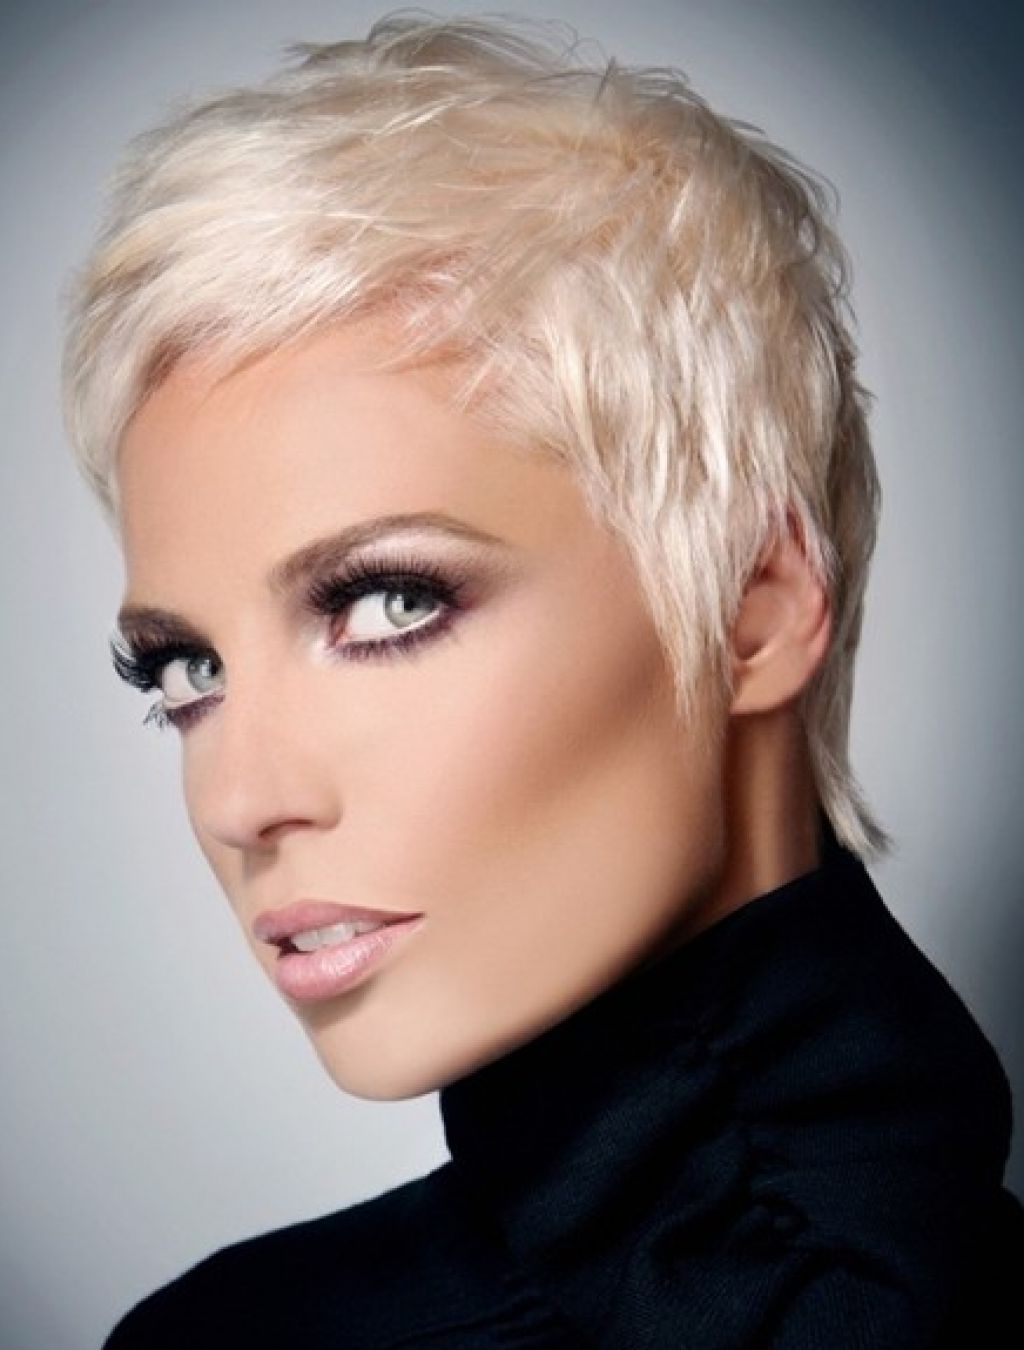 Short Pixie Haircuts For Gray Hair Pictures Of Short Hairstyles For Most Recent Short Pixie Hairstyles For Gray Hair (View 1 of 15)